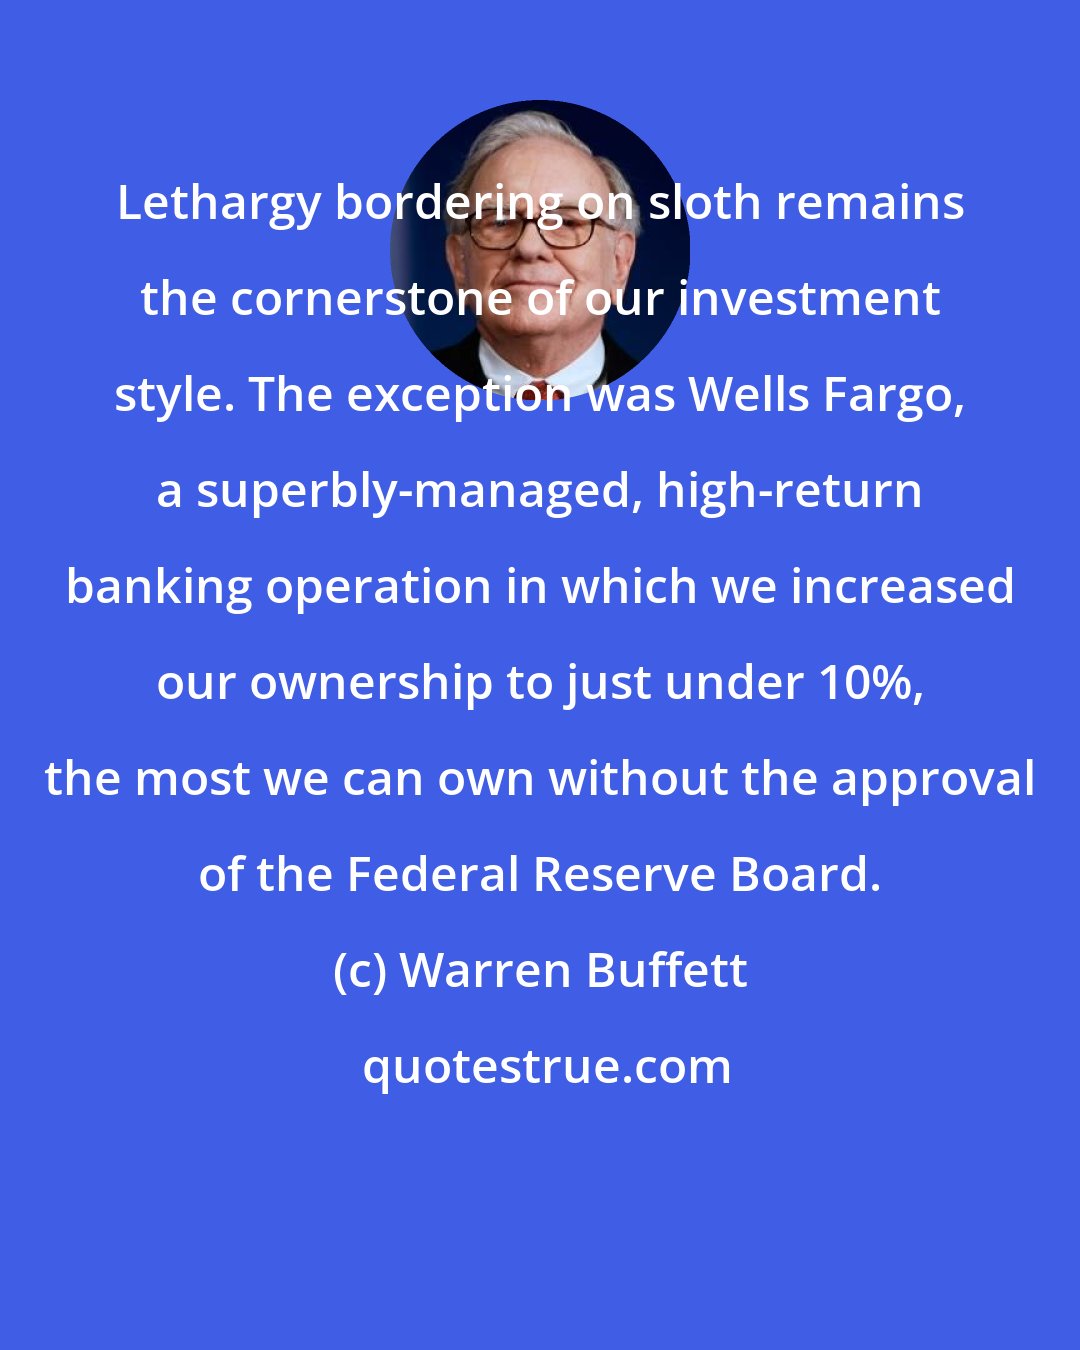 Warren Buffett: Lethargy bordering on sloth remains the cornerstone of our investment style. The exception was Wells Fargo, a superbly-managed, high-return banking operation in which we increased our ownership to just under 10%, the most we can own without the approval of the Federal Reserve Board.